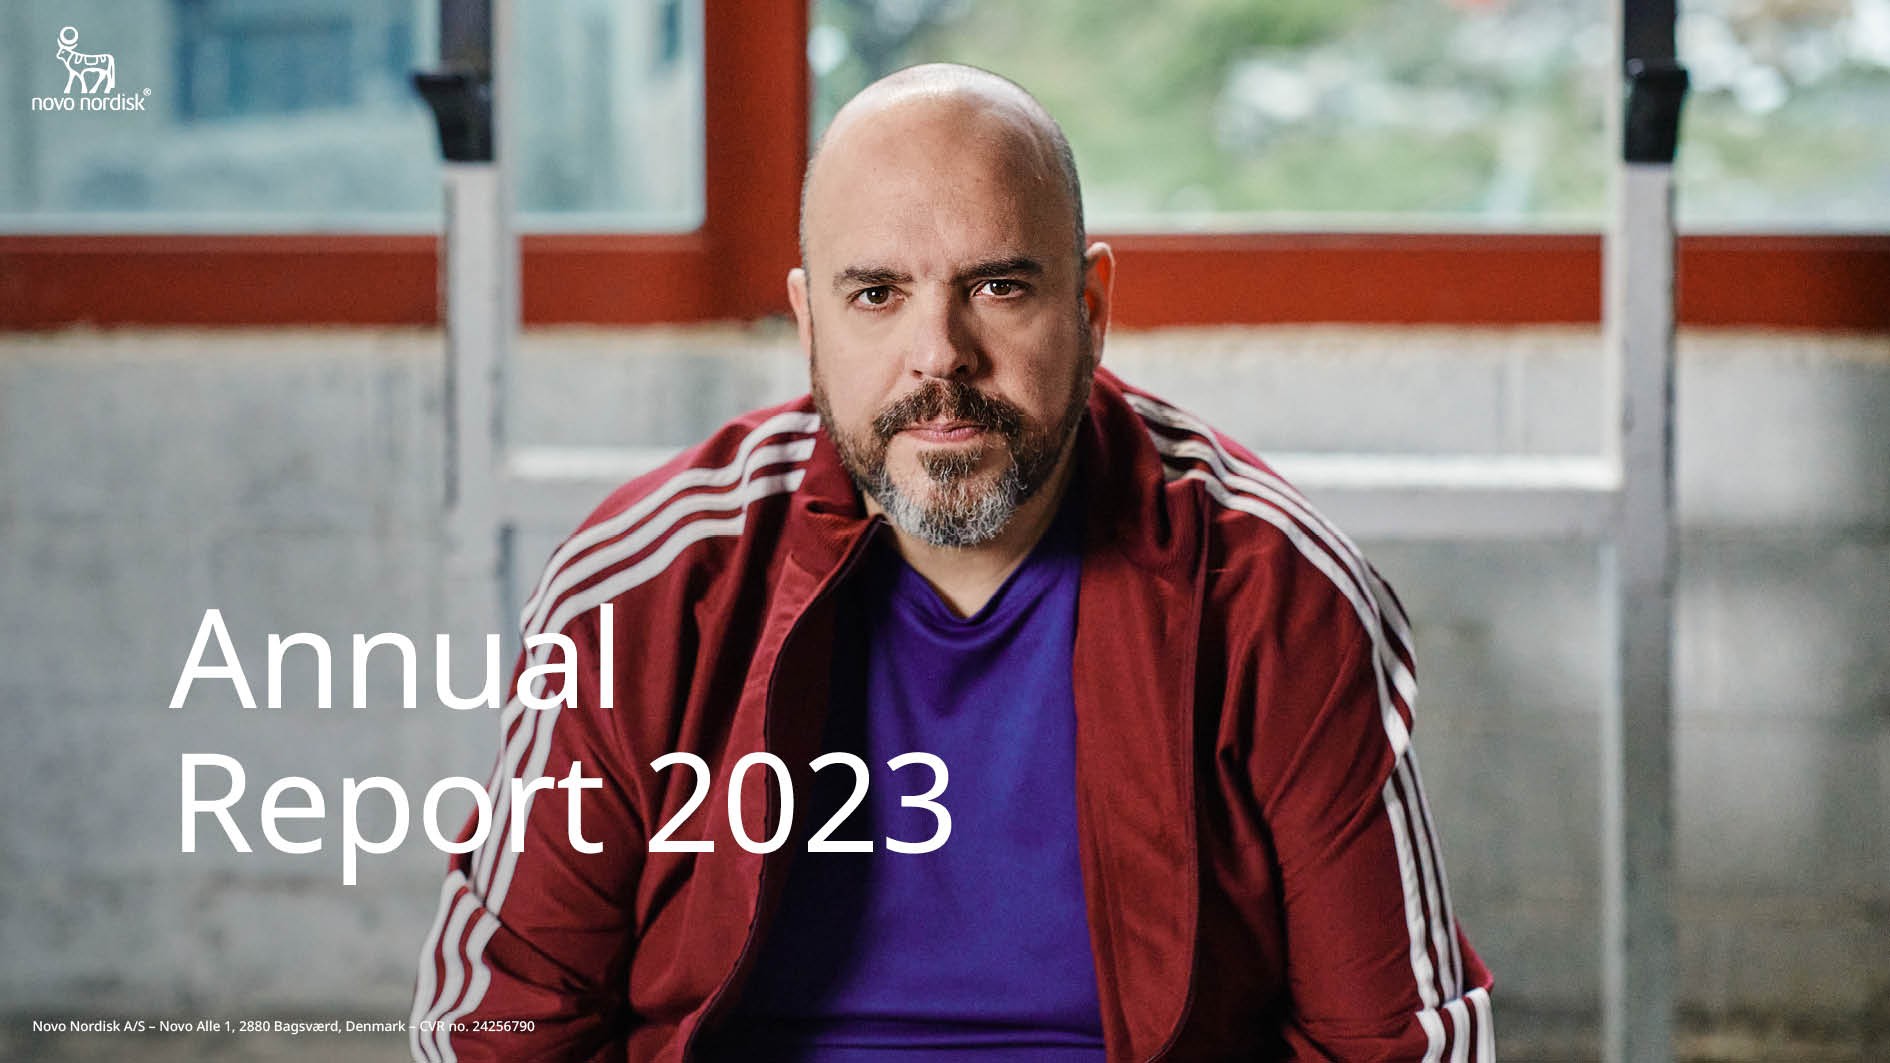 Front cover of the Novo Nordisk Annual Report 2023